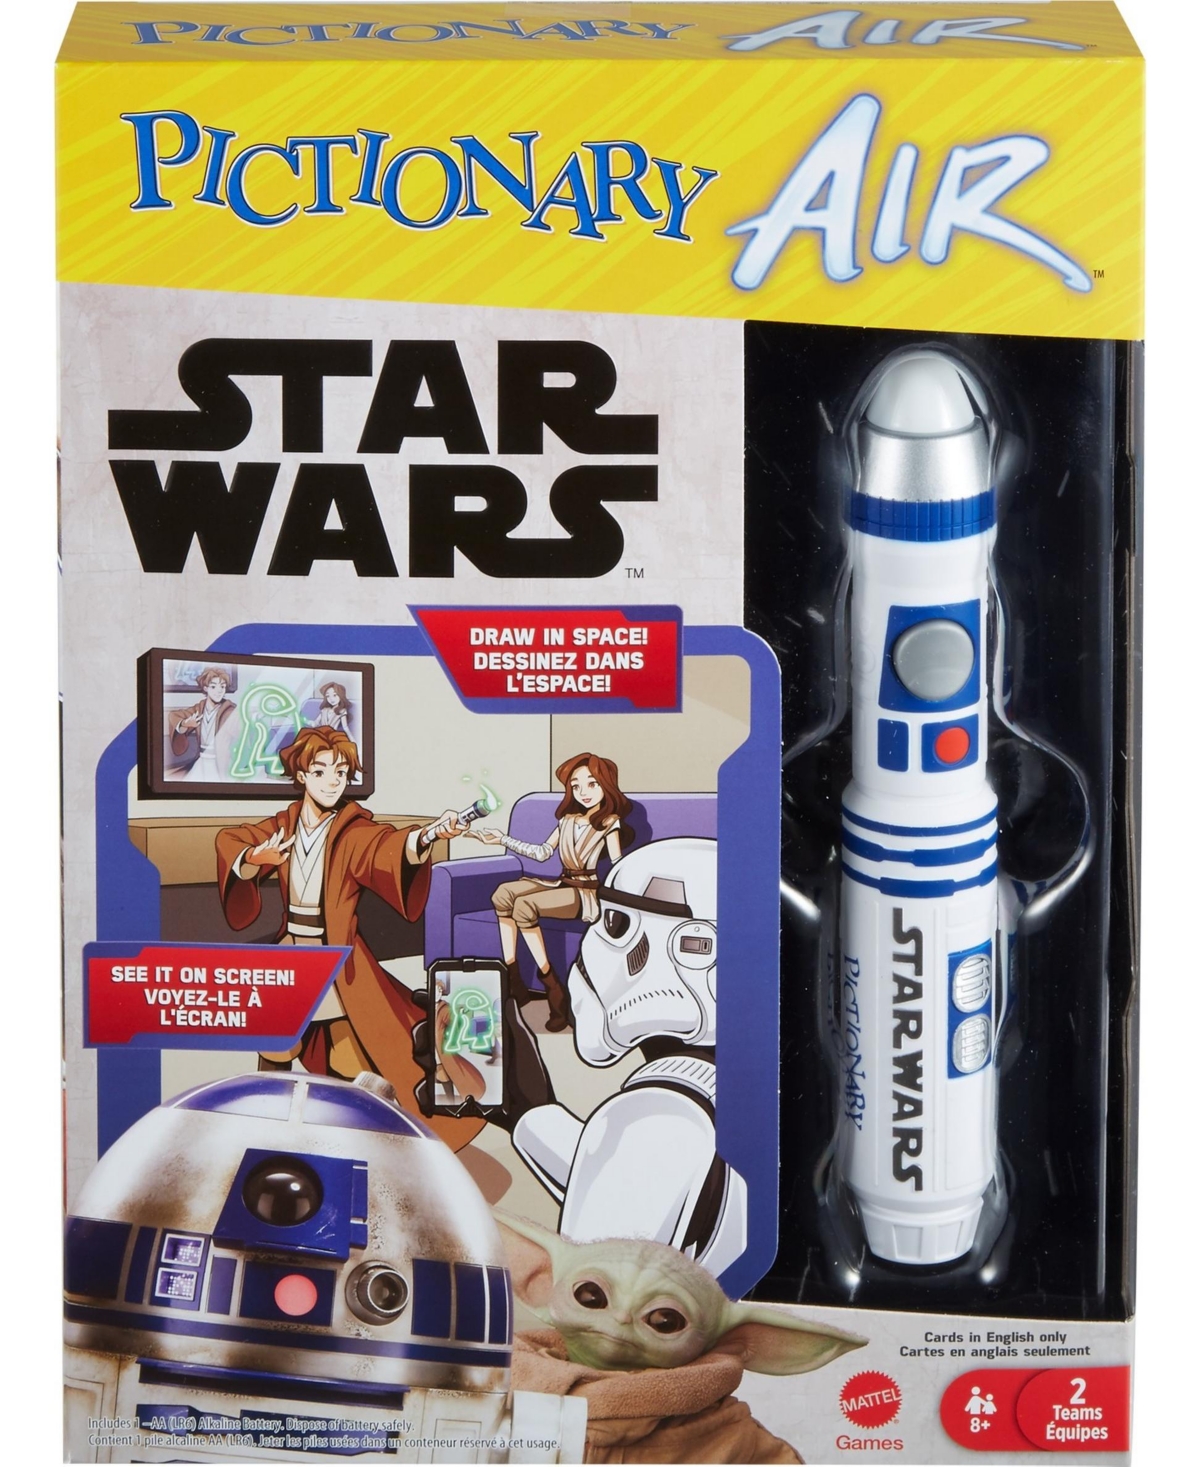 Mattel Pictionary Air Star Wars Family Drawing Game For Kids And Adults In Multi